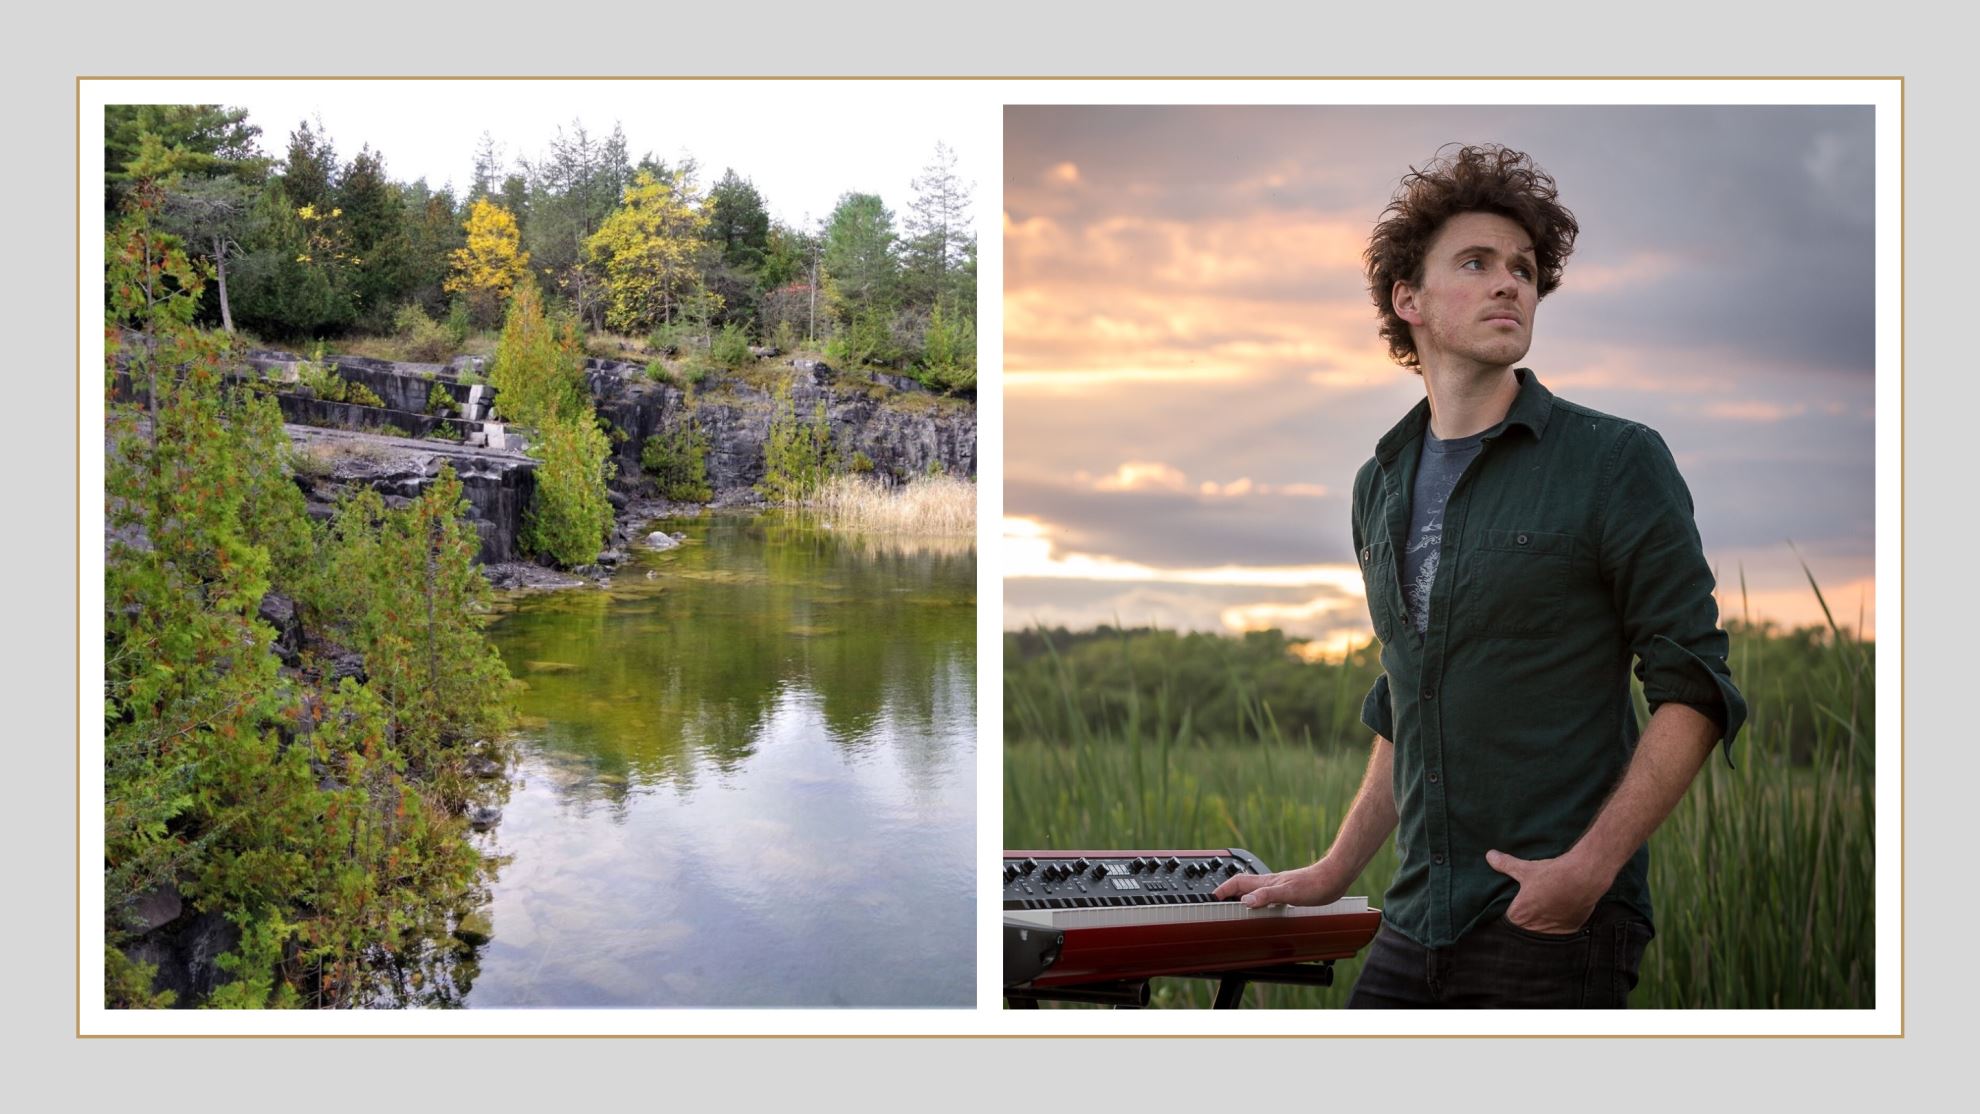 Champlain Area Trails Hosts Piano by Nature for Special Outdoor Concert